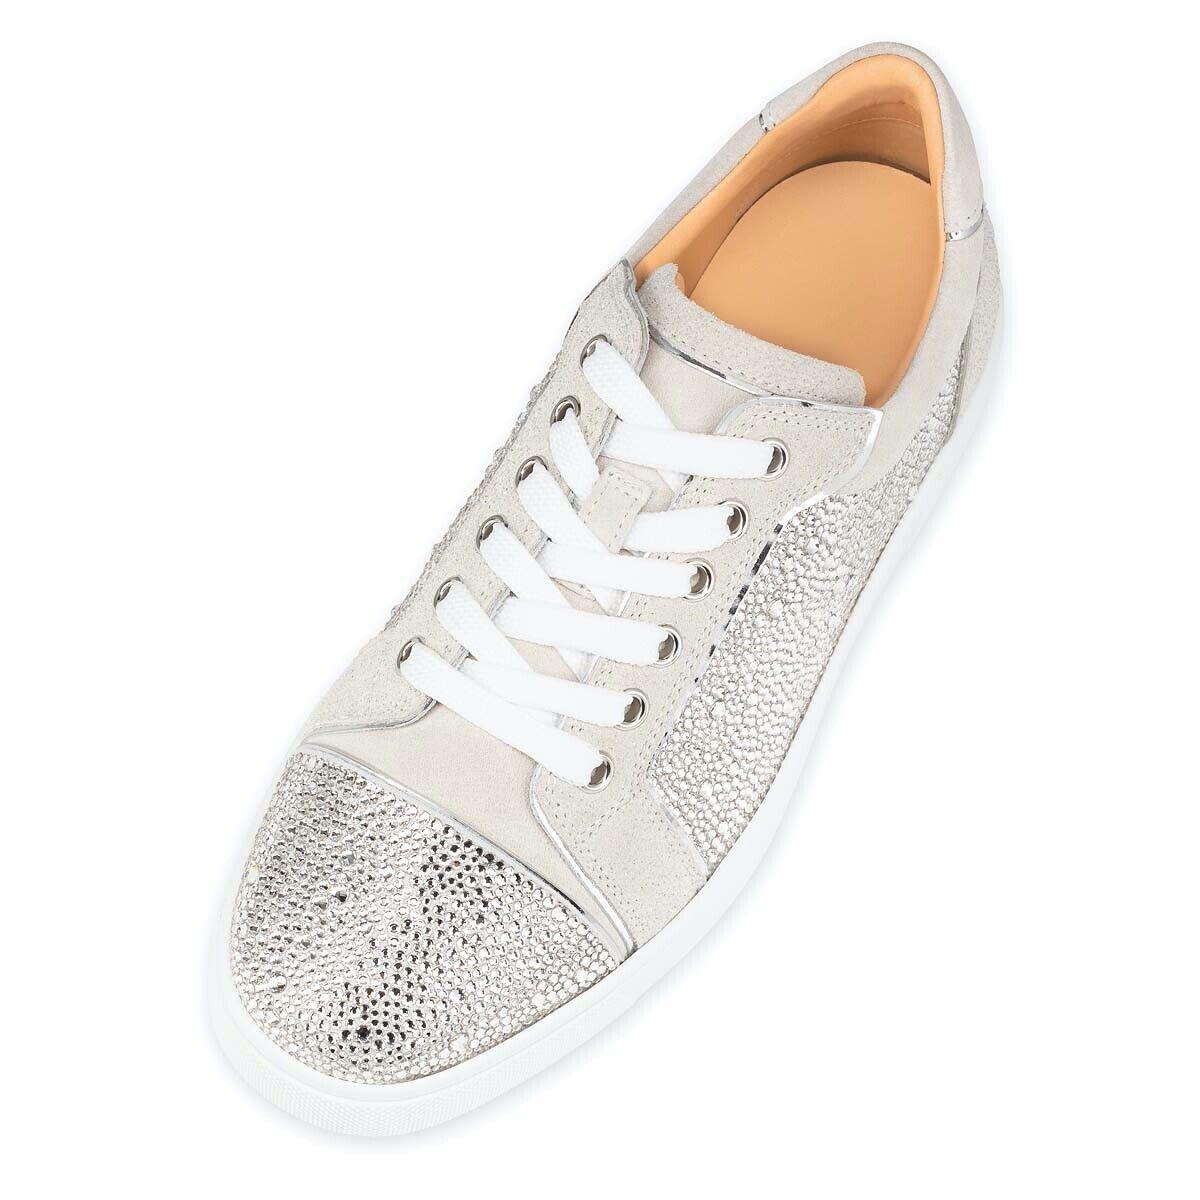 An iconic model, the sneaker Vieira Strass is dressed this season in light-colored suede studded with strass and glitter. Fully lined in nude leather and has a red rubber sole.